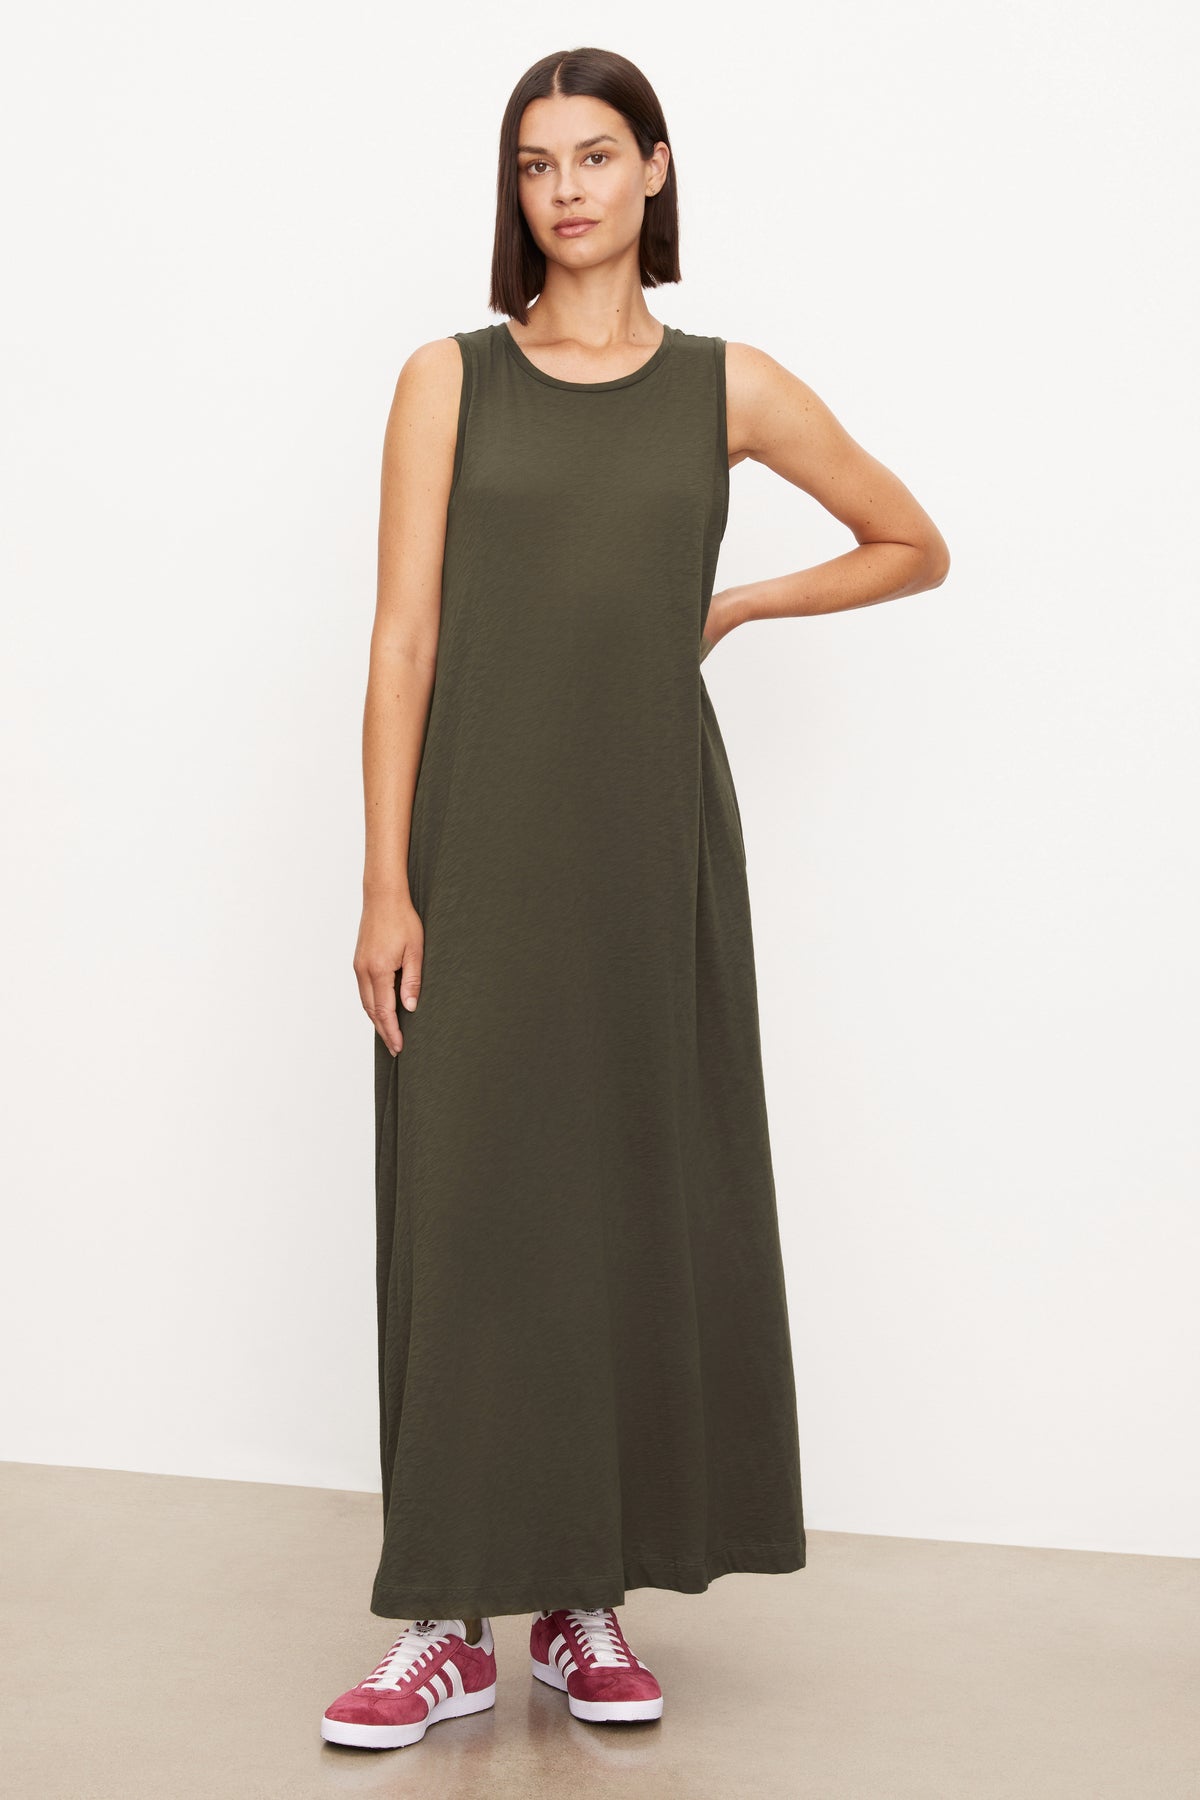 A woman wearing an olive green EDITH SLEEVELESS MAXI DRESS by Velvet by Graham & Spencer with a long silhouette and slash pockets.-35701765898433